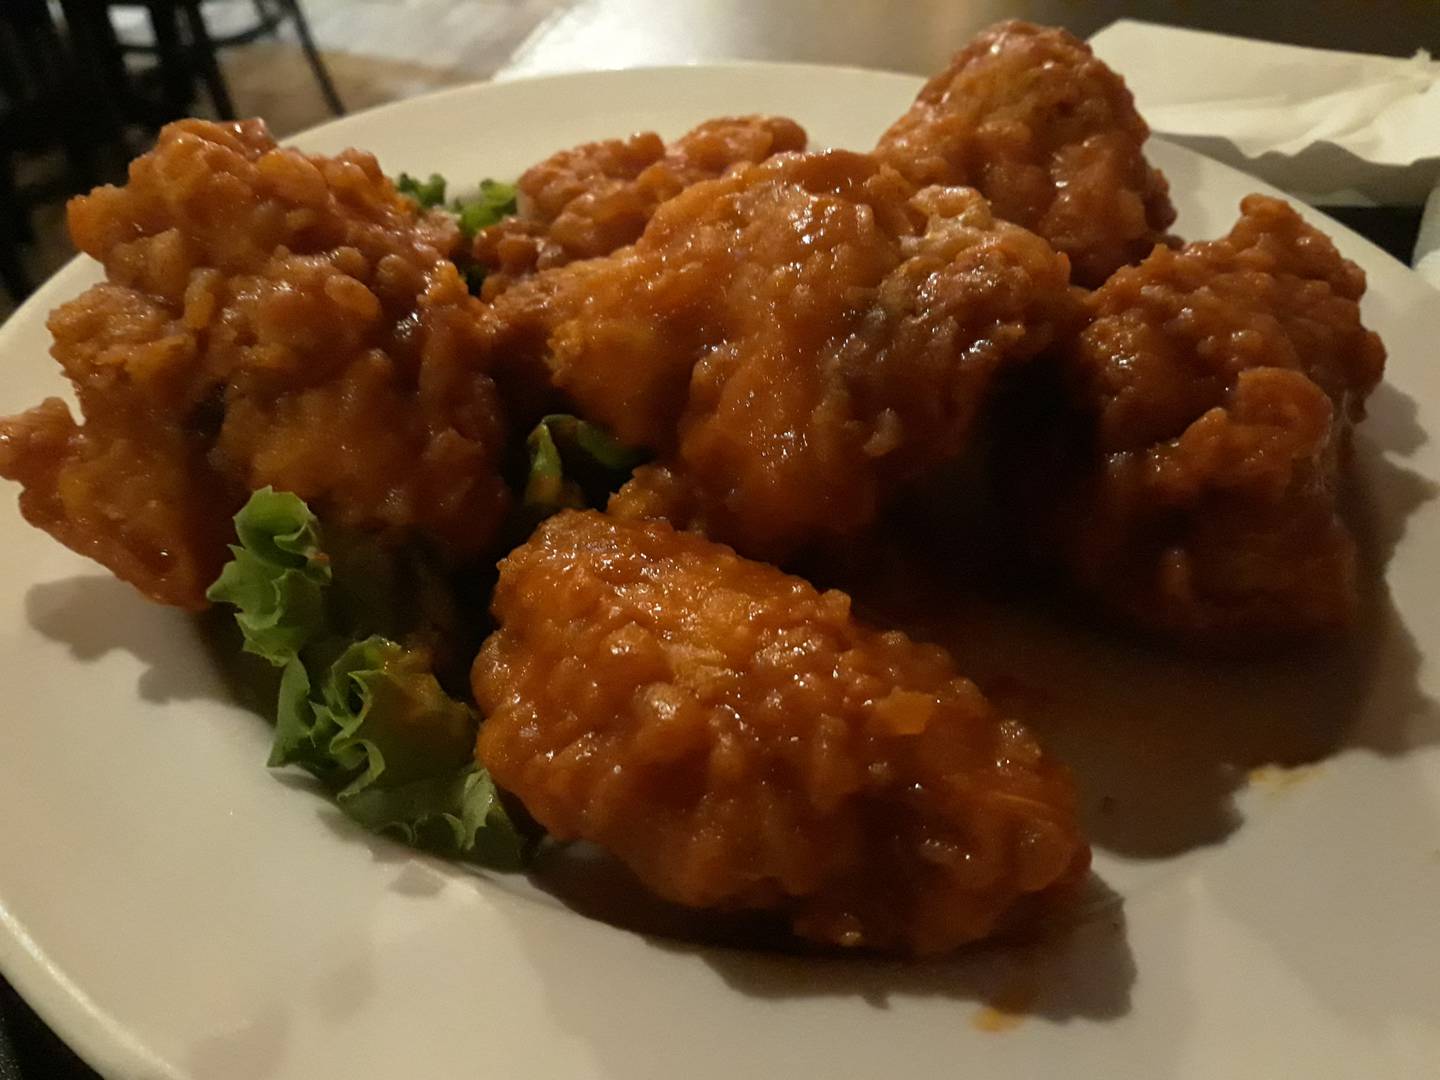 Wingers and football go hand-in-hand. An order of six, breaded chicken wings hot were my preference at Riverfront Bar and Grill in Peru.